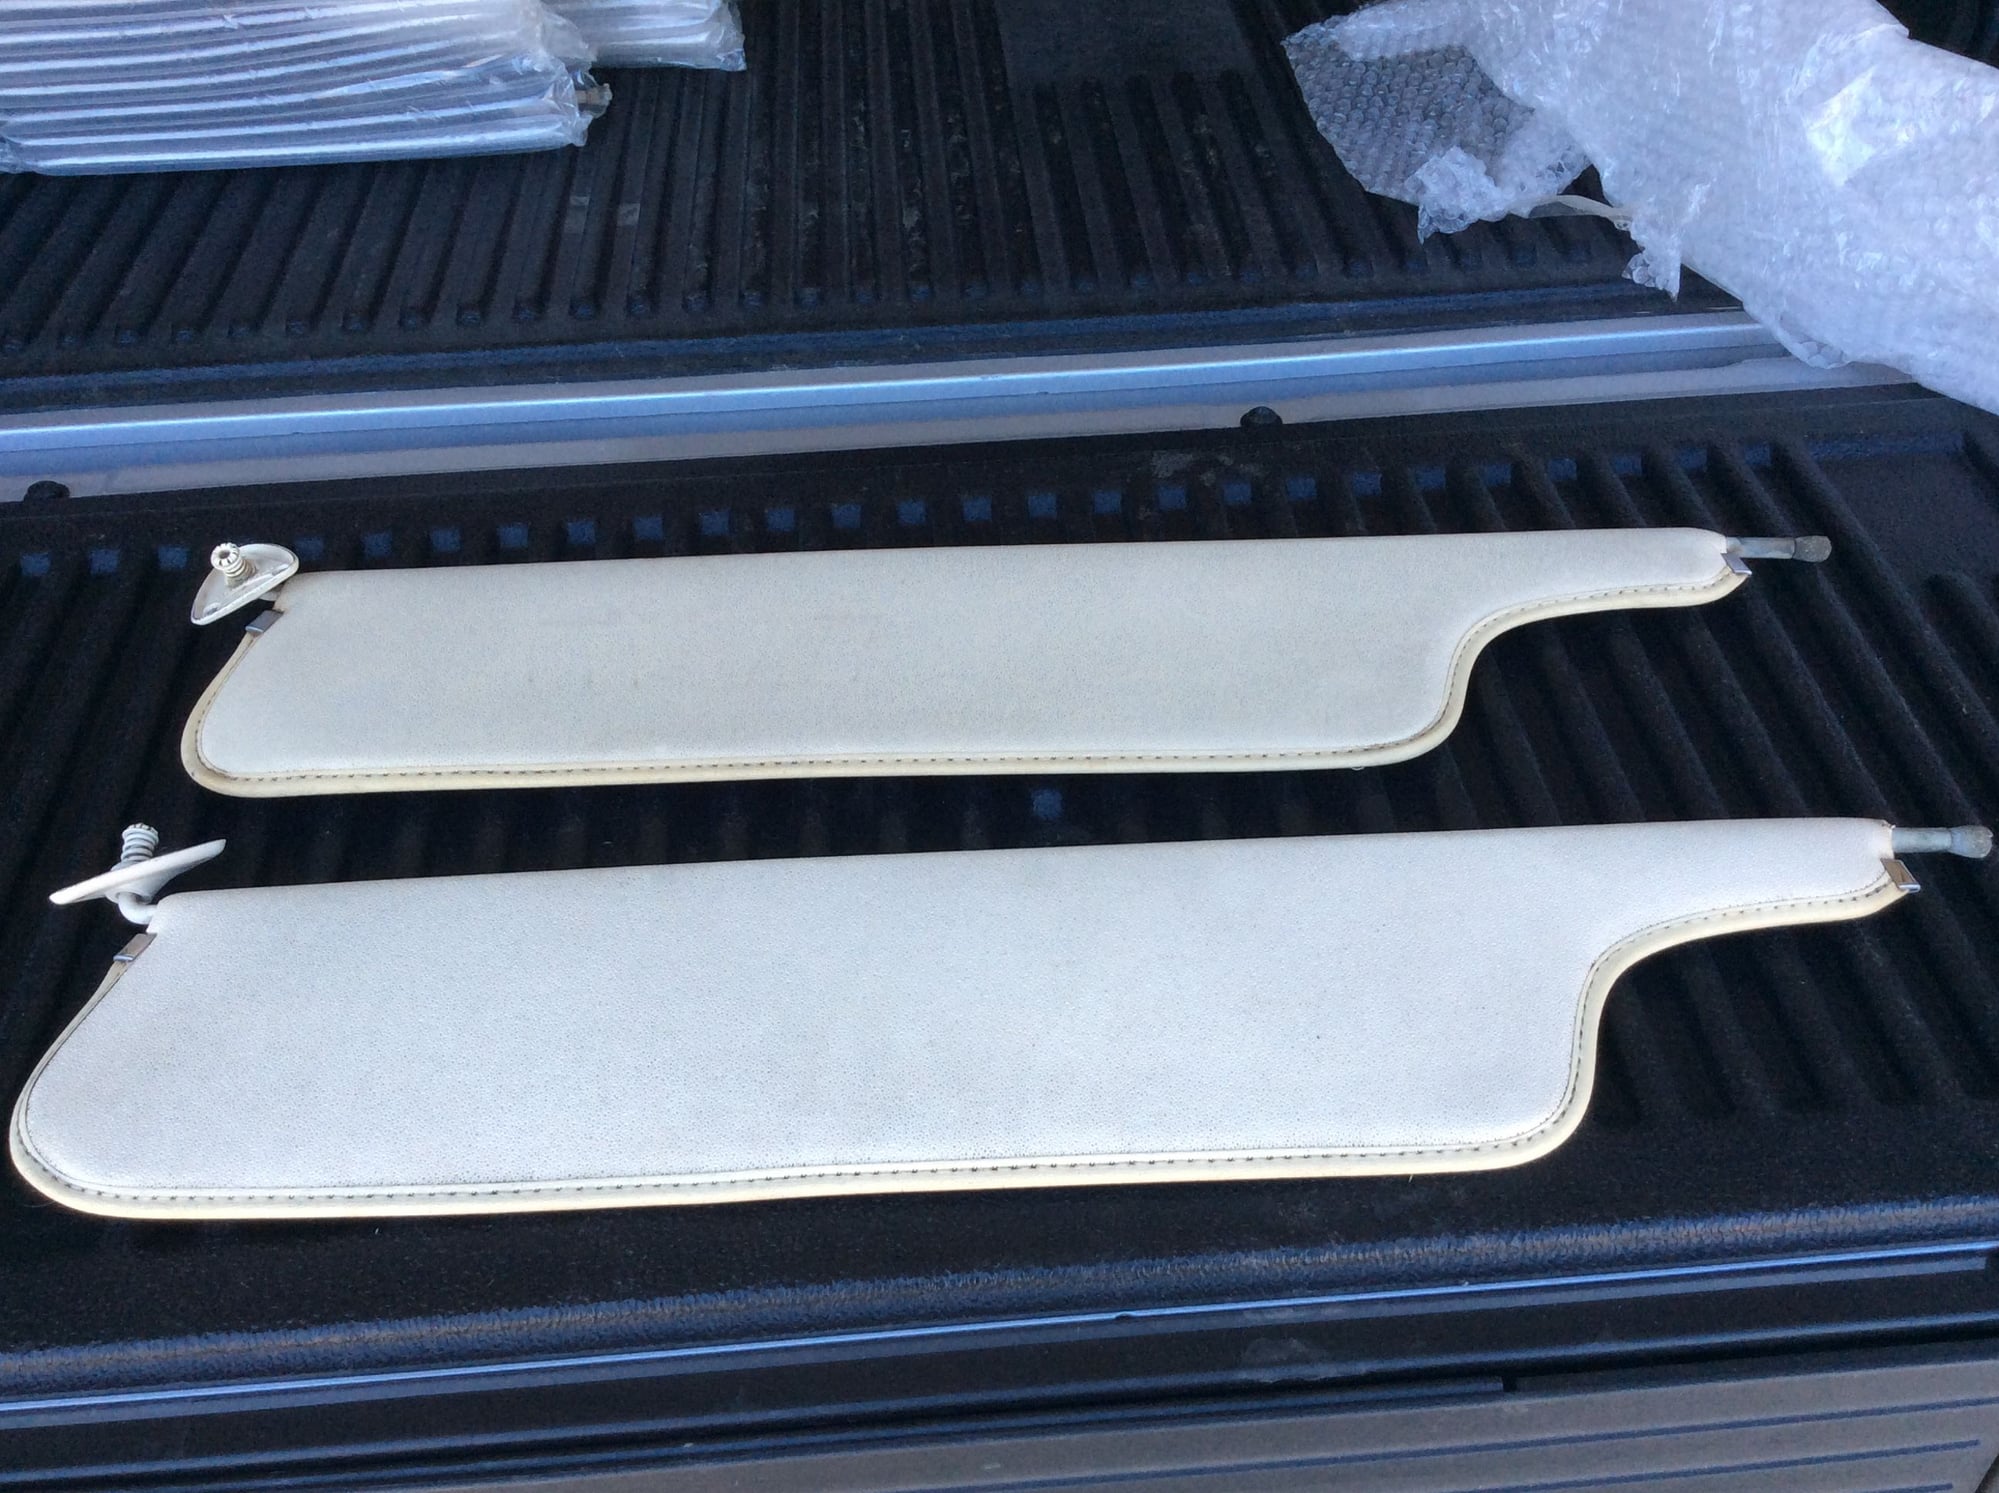 Interior/Upholstery - Ivory color sun visors - Used - 1973 to 1979 Ford 1/2 Ton Pickup - Sioux Falls, SD 57108, United States